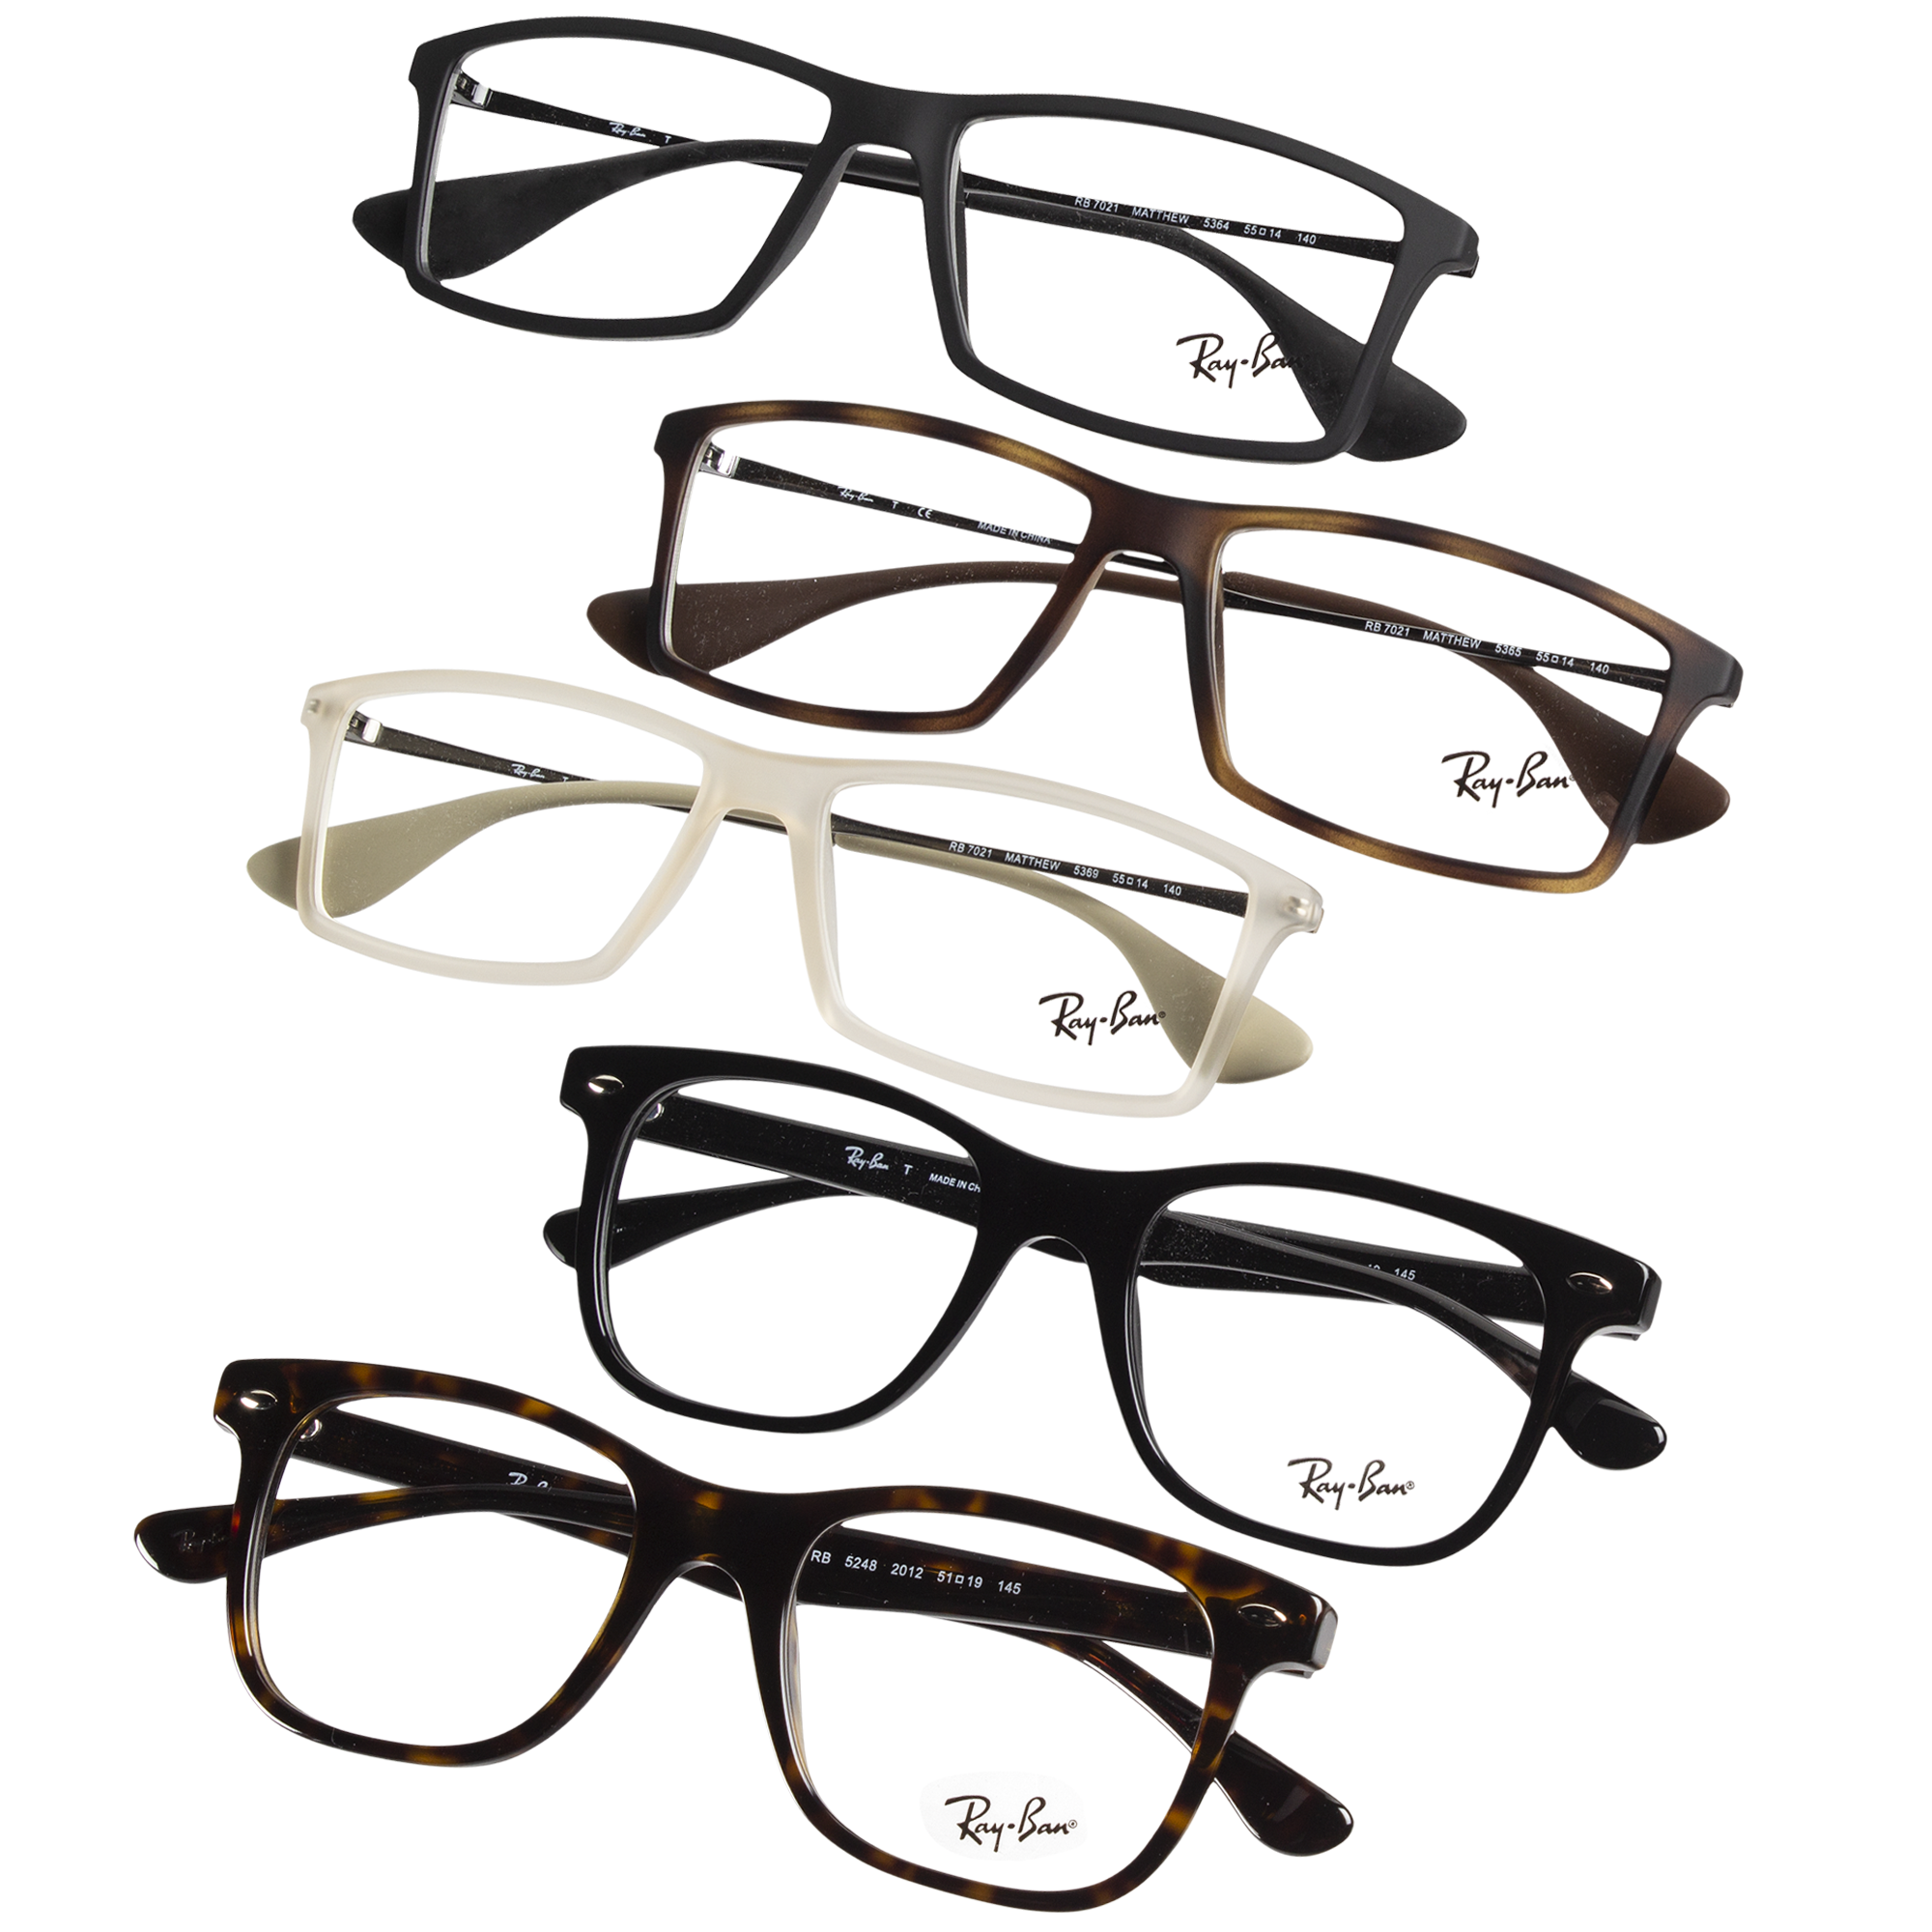 Today only: Ray-Ban eyeglasses for $34 shipped